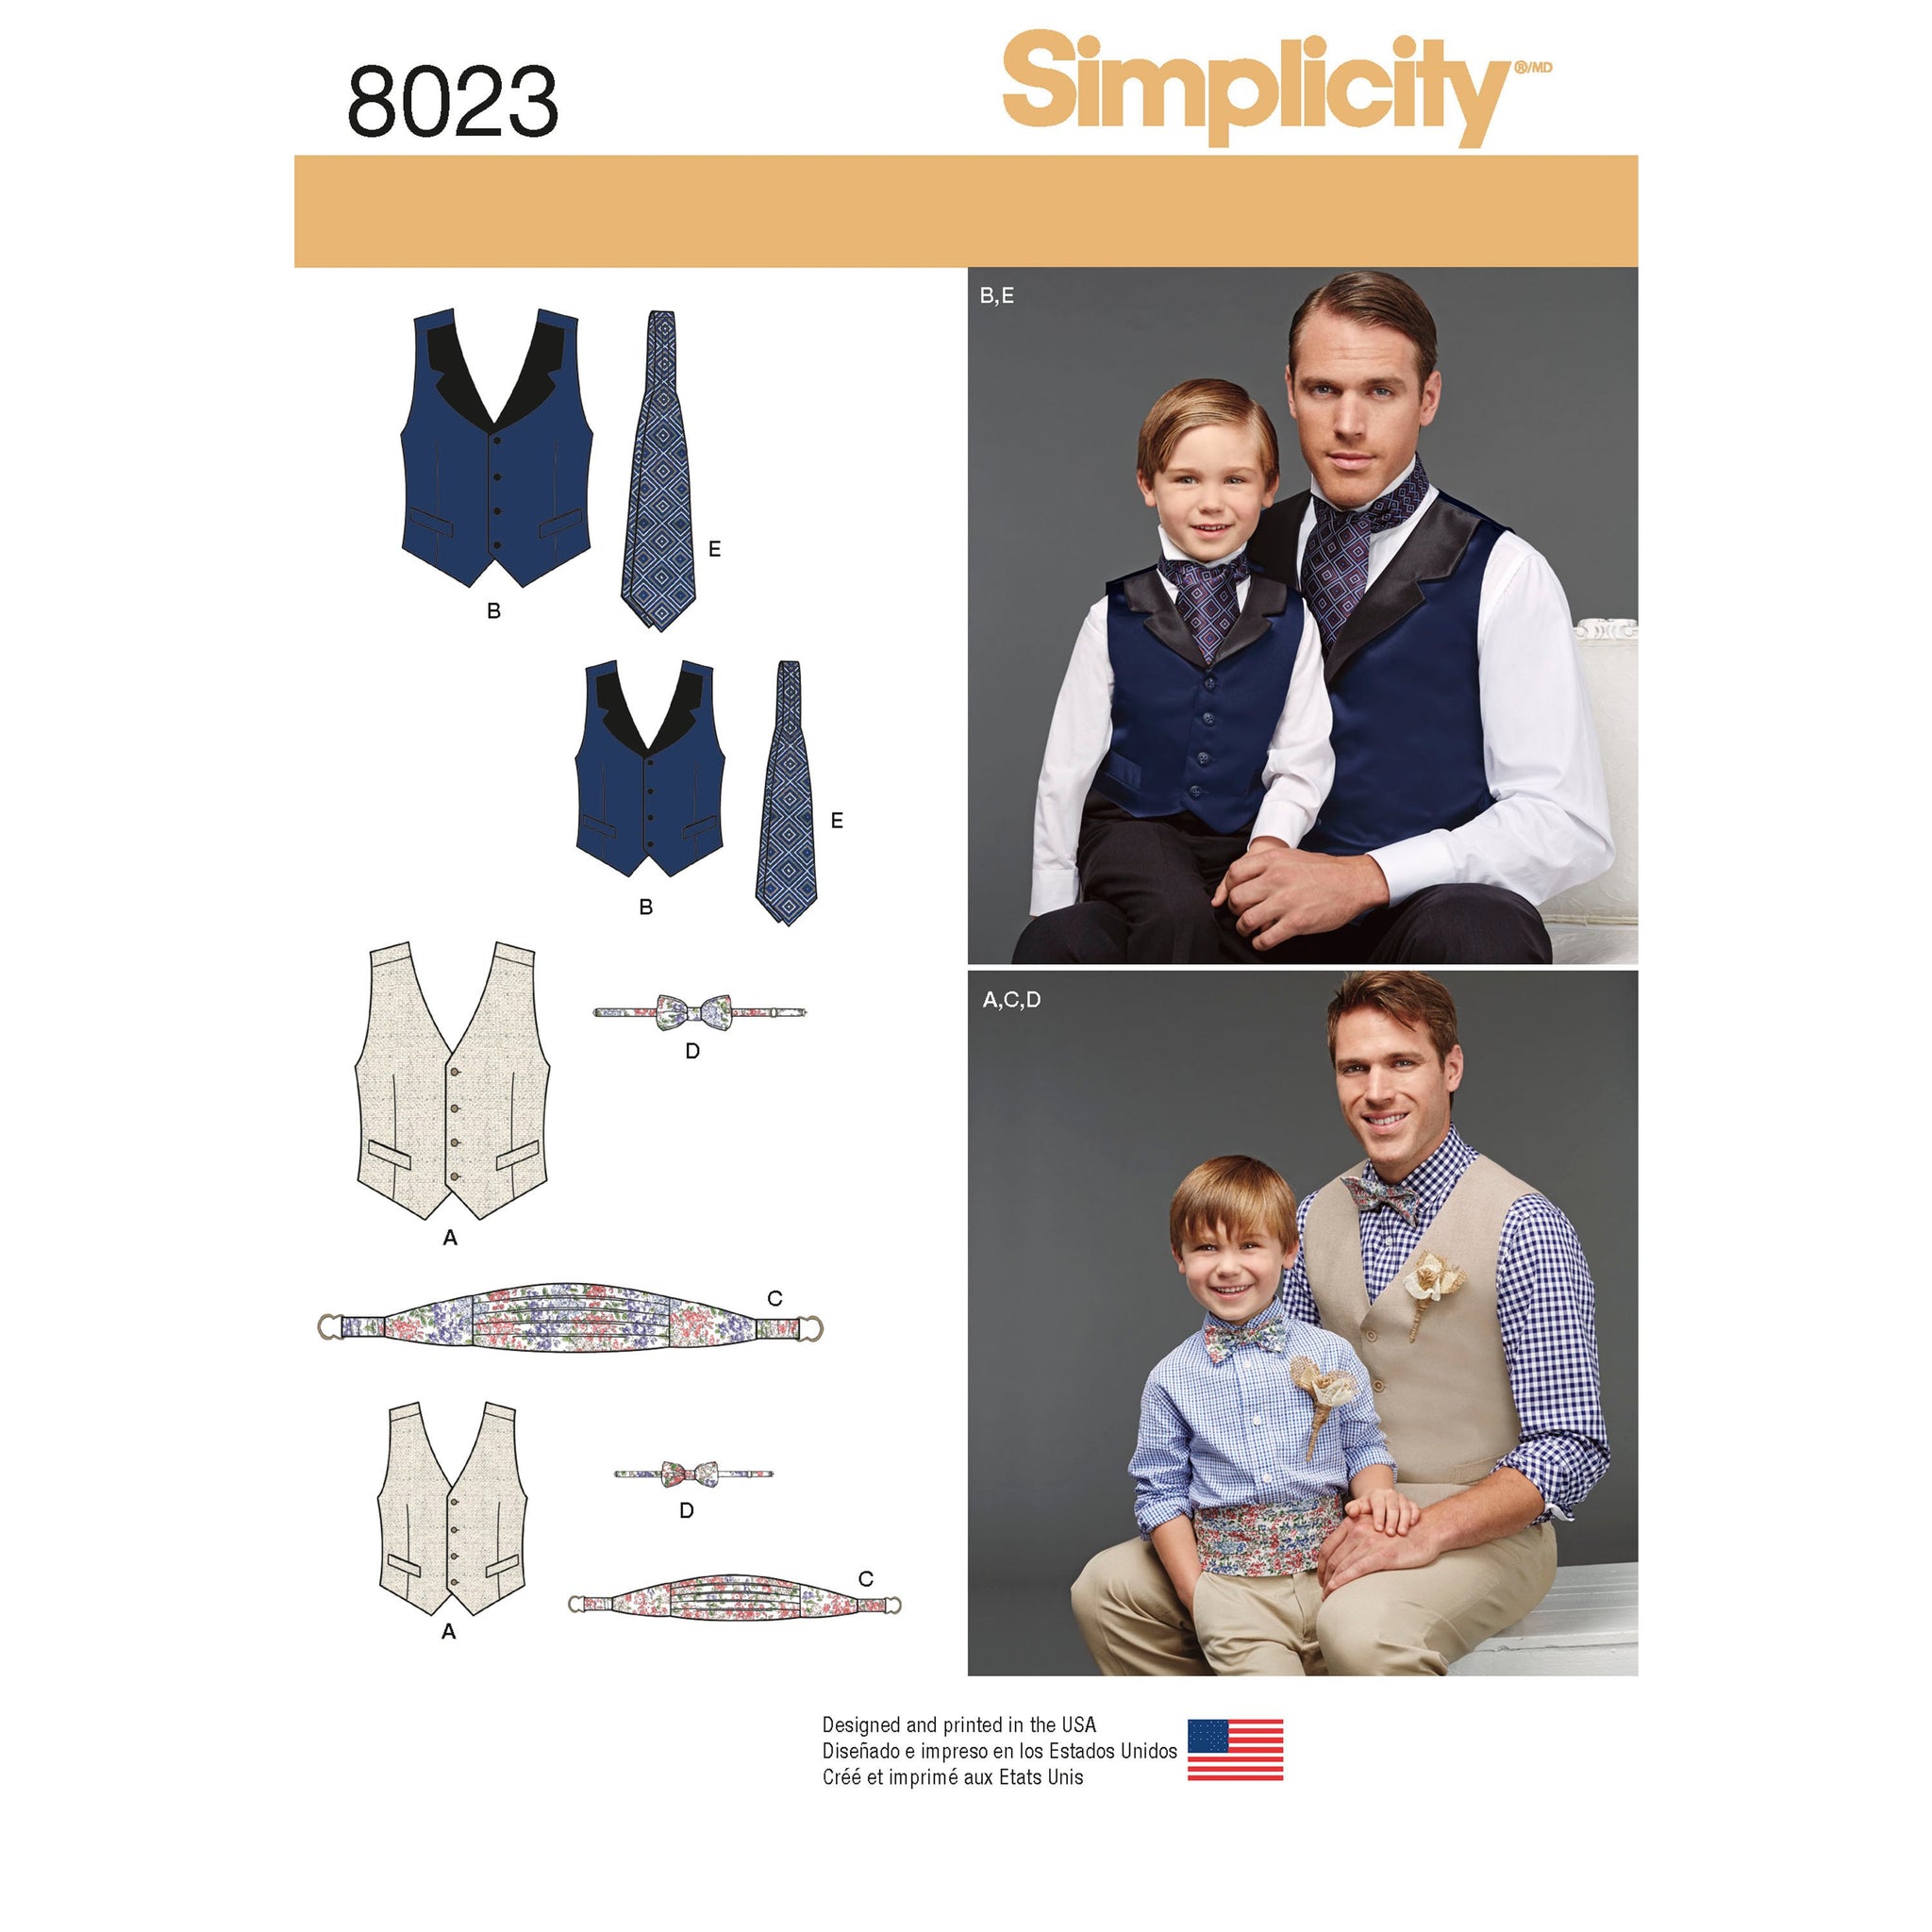 Boy's and Men's, Lined Vests, Bow Tie, Cummerbund and Ascot, Father and Son, Sewing Pattern by Simplicity 8023  Boy's and men's special occasion accessories include lined vest with or without contrast lapels, cummerbund, bow-tie with back closure, and ascot.  Fabric Suggestions: Batiks, Brocade, Chambray, Cotton Types, Damask, Denim, Gingham, Linen Types, Poplin, Sateen, Satin. Extra fabric needed to match plaids, stripes or one-way design fabrics. 